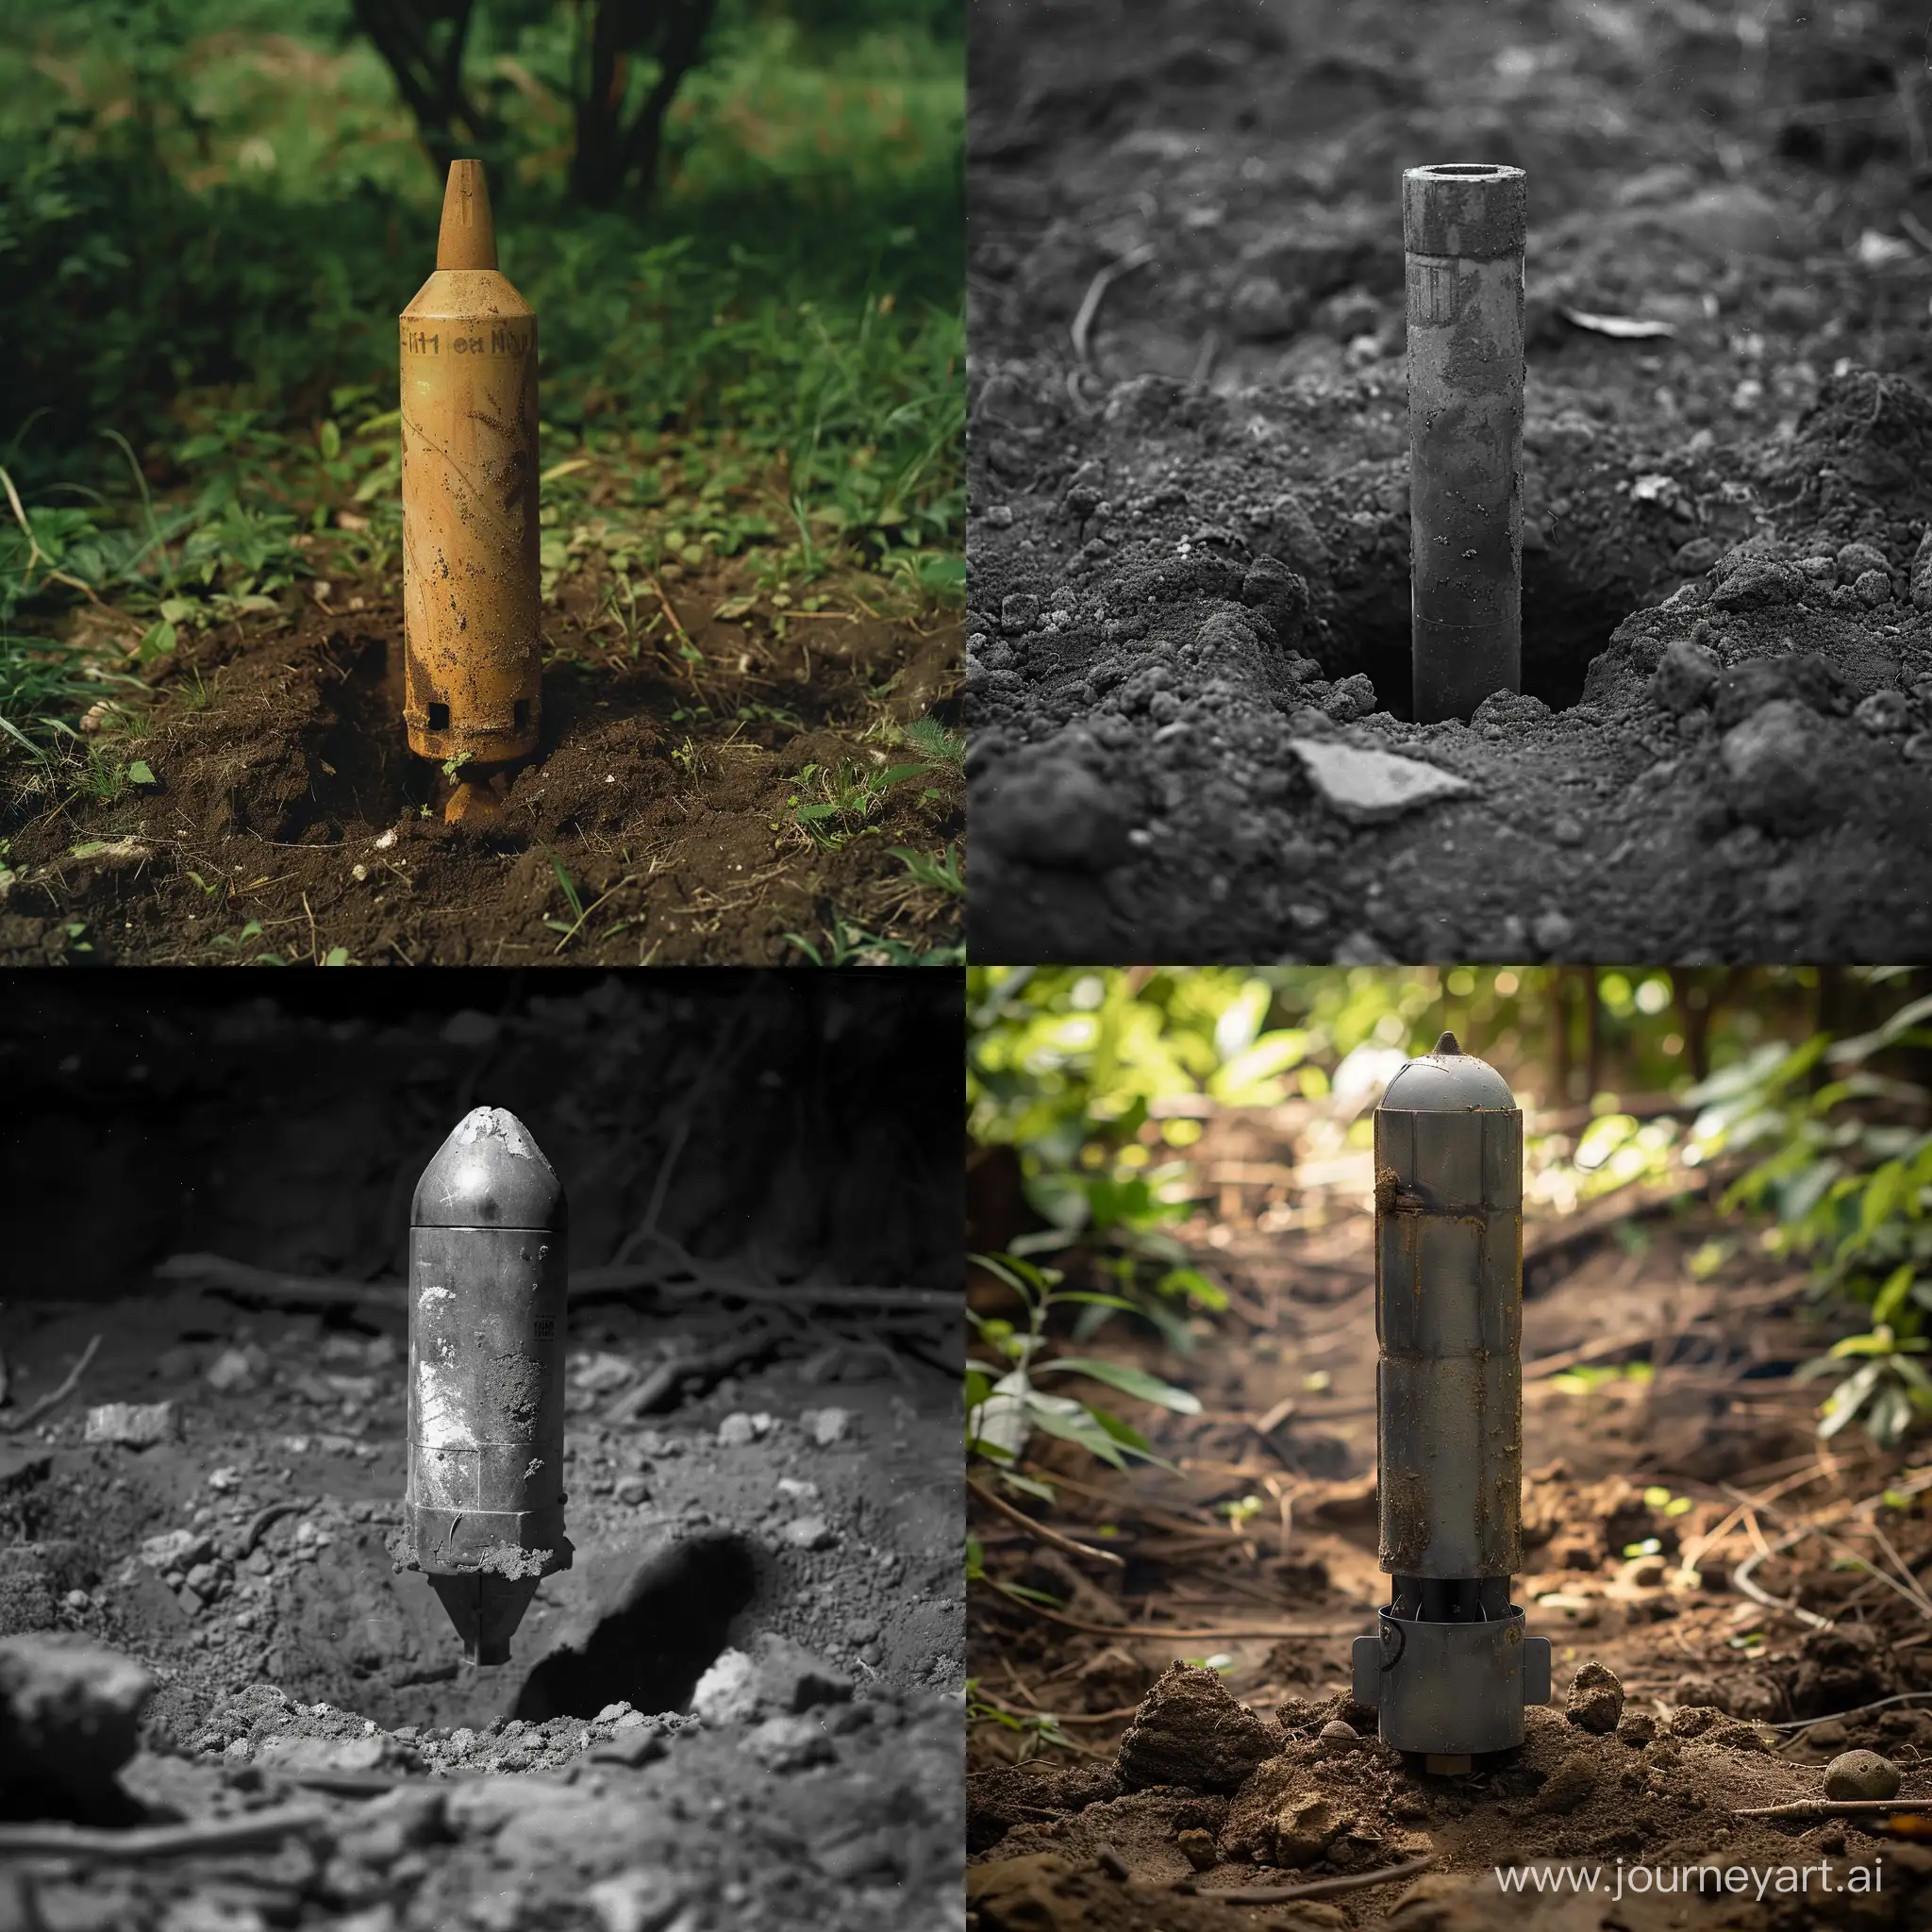 Unexploded-Little-Boy-Bomb-Stuck-in-Ground-with-Square-Tail